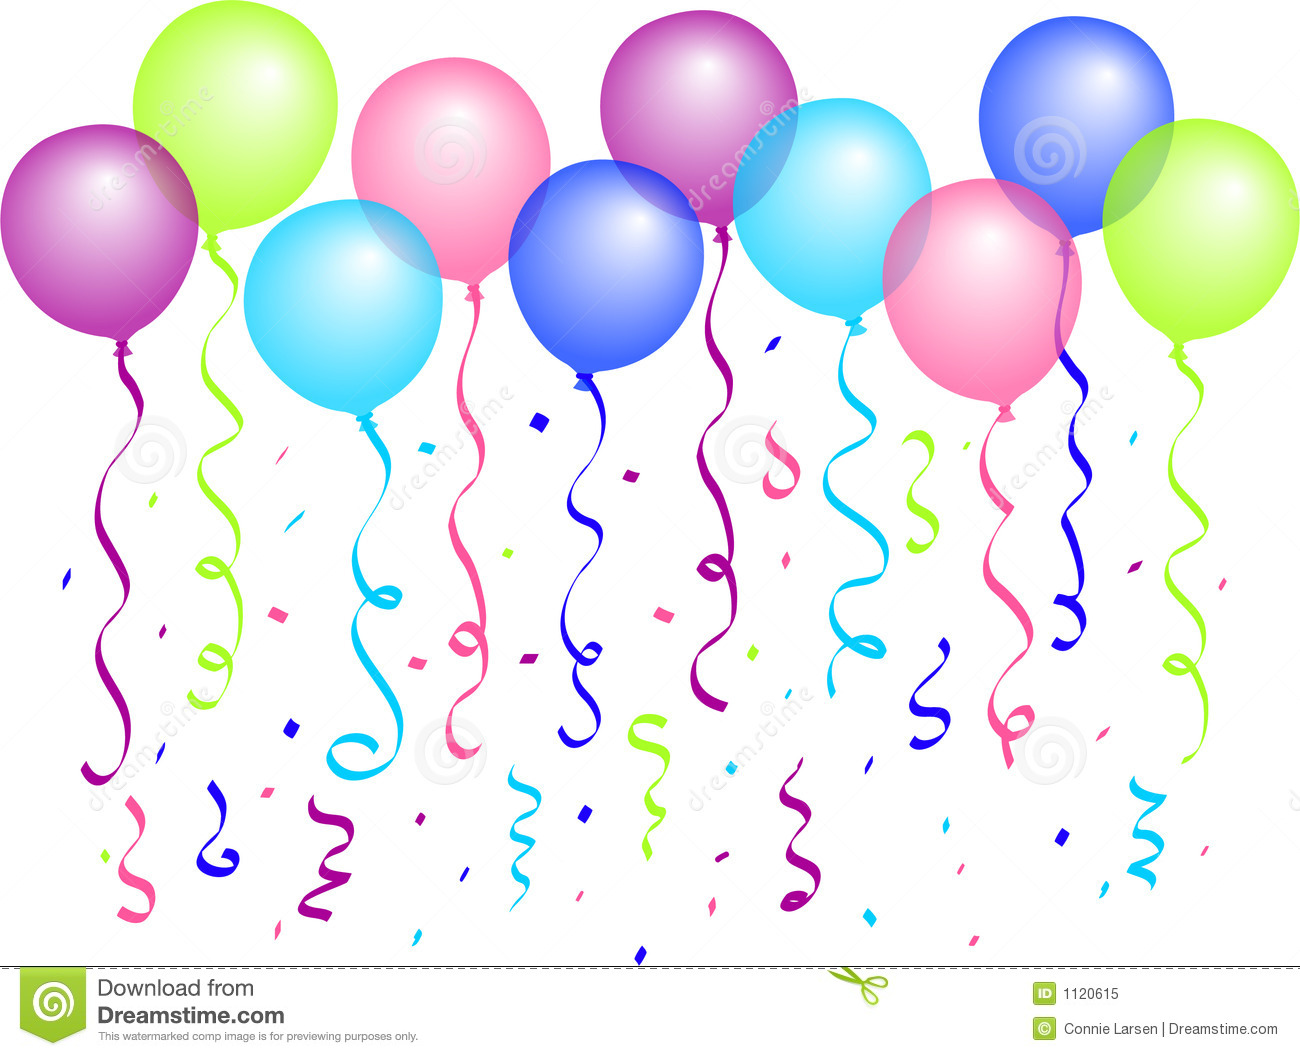     Balloons And Confetti   Eps Available   Separate Balloons And Change